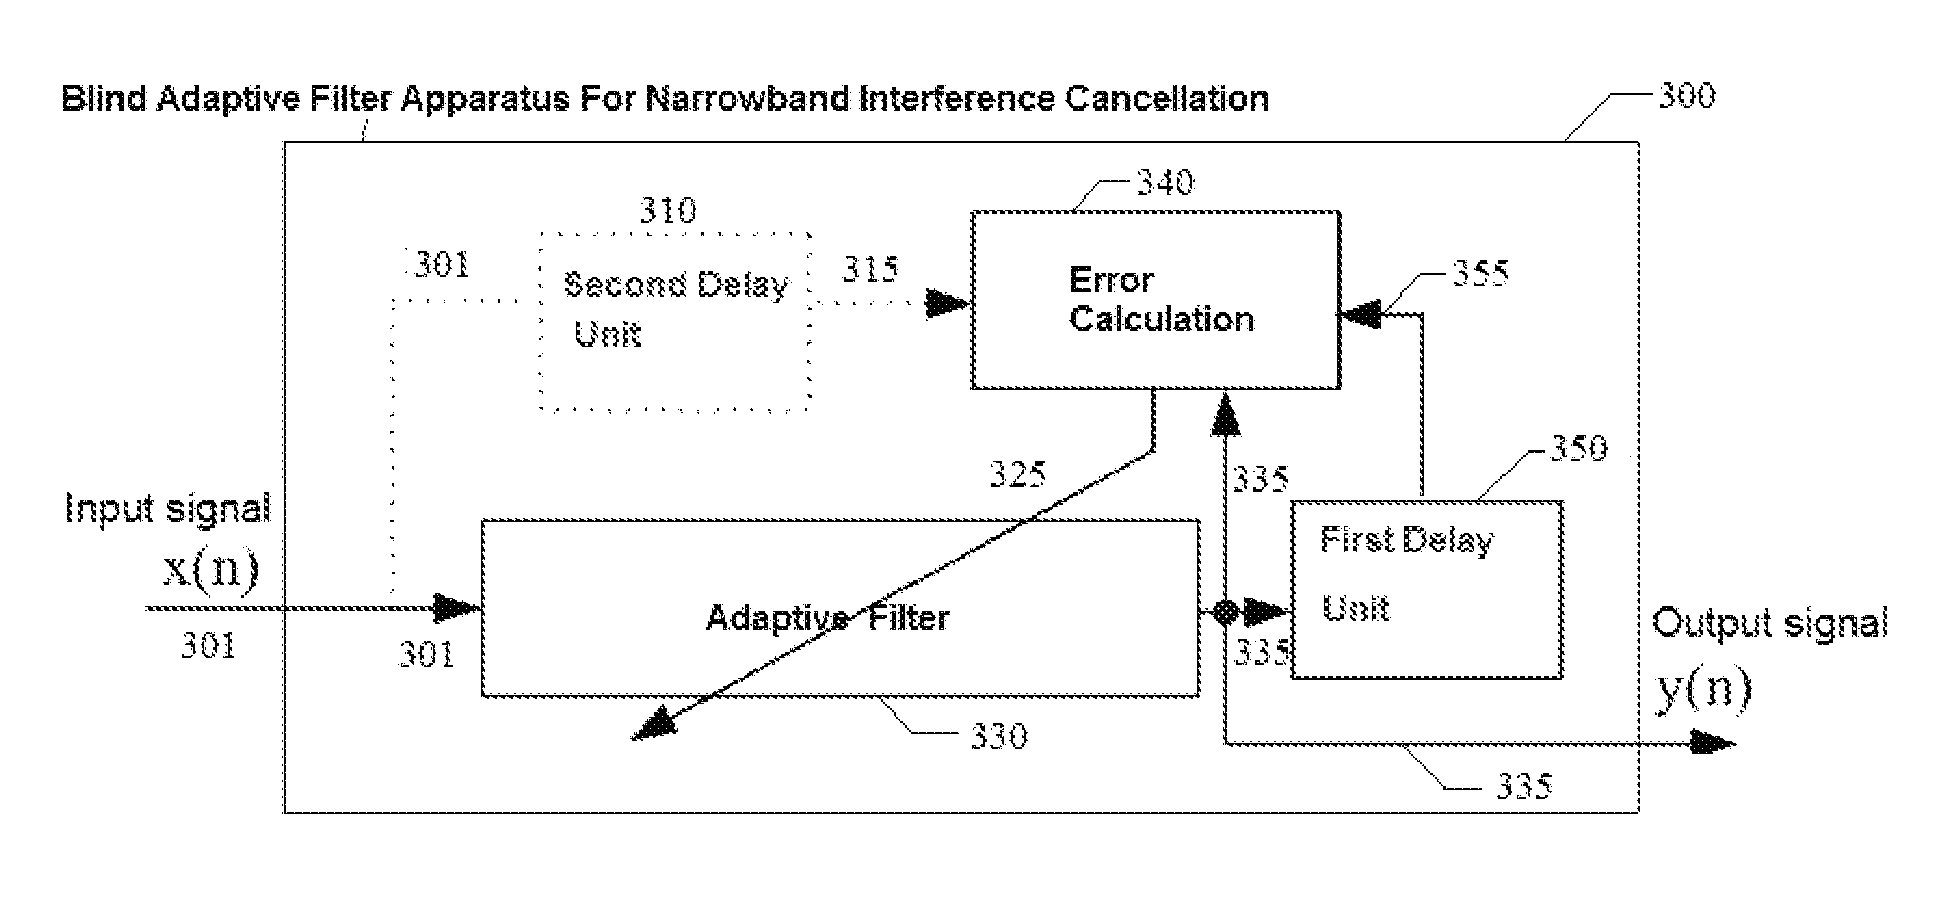 Blind adaptive filter for narrowband interference cancellation